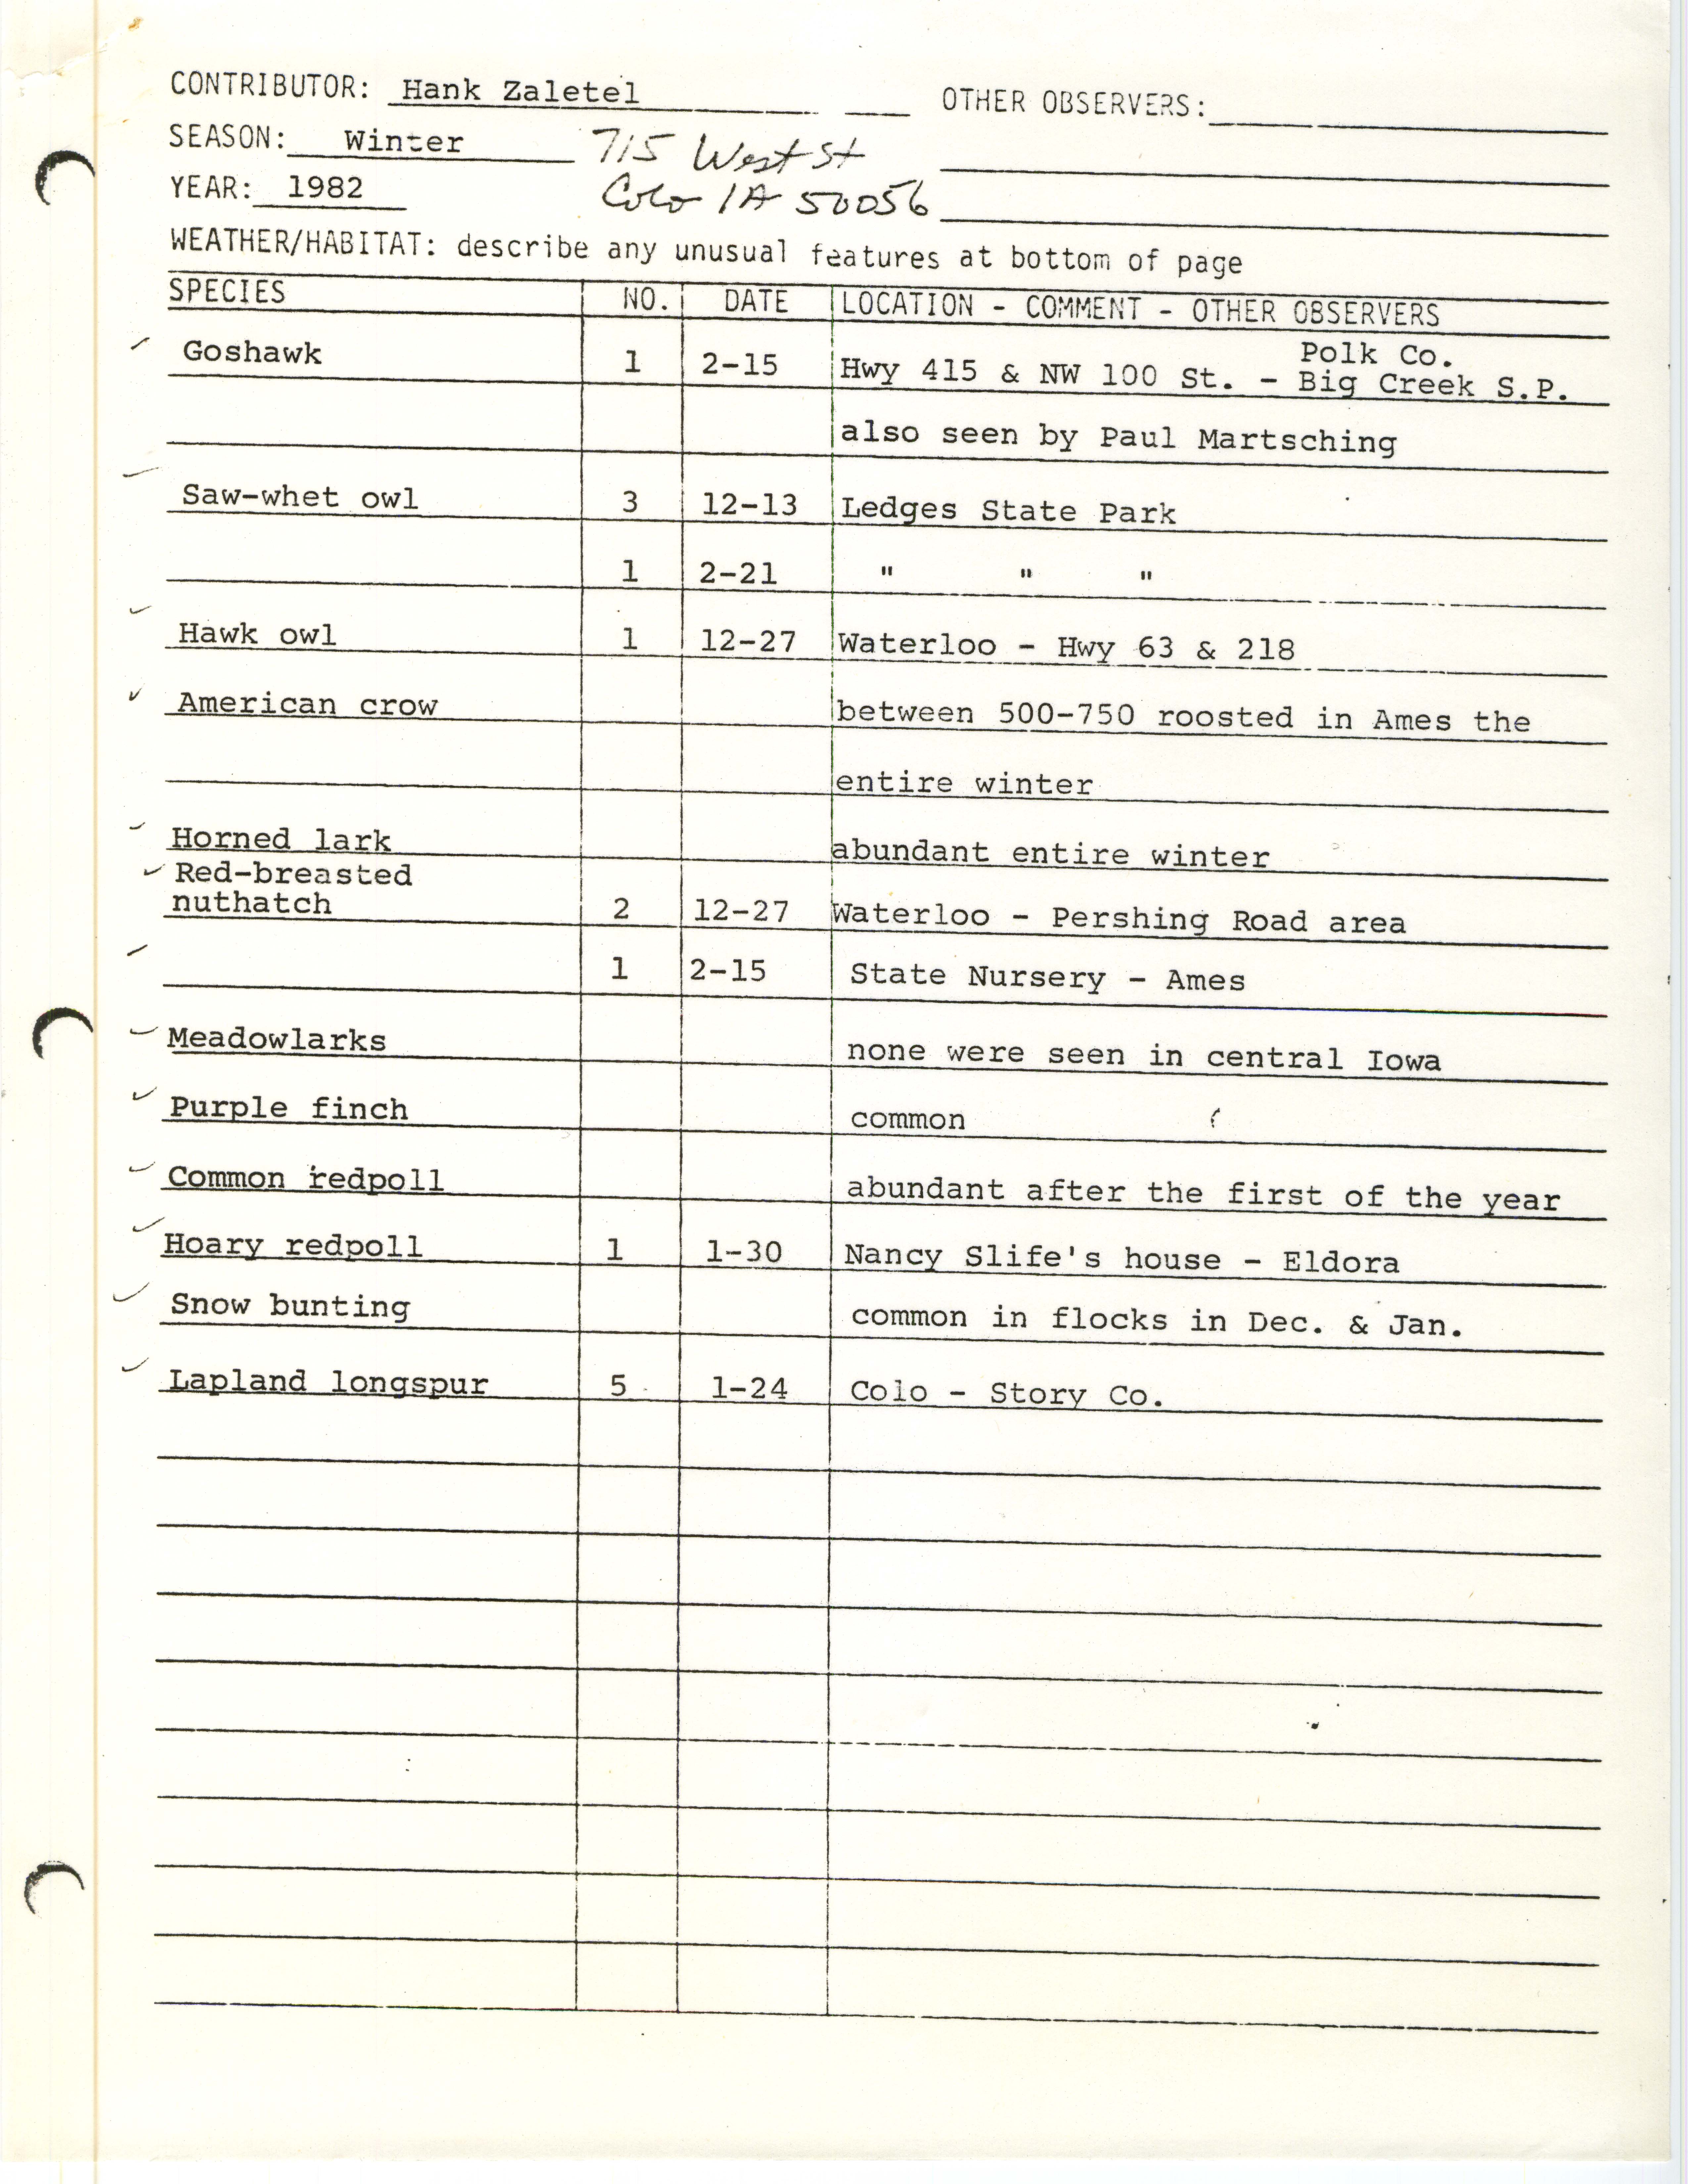 Field notes contributed by Hank Zaletel, winter 1981-1982